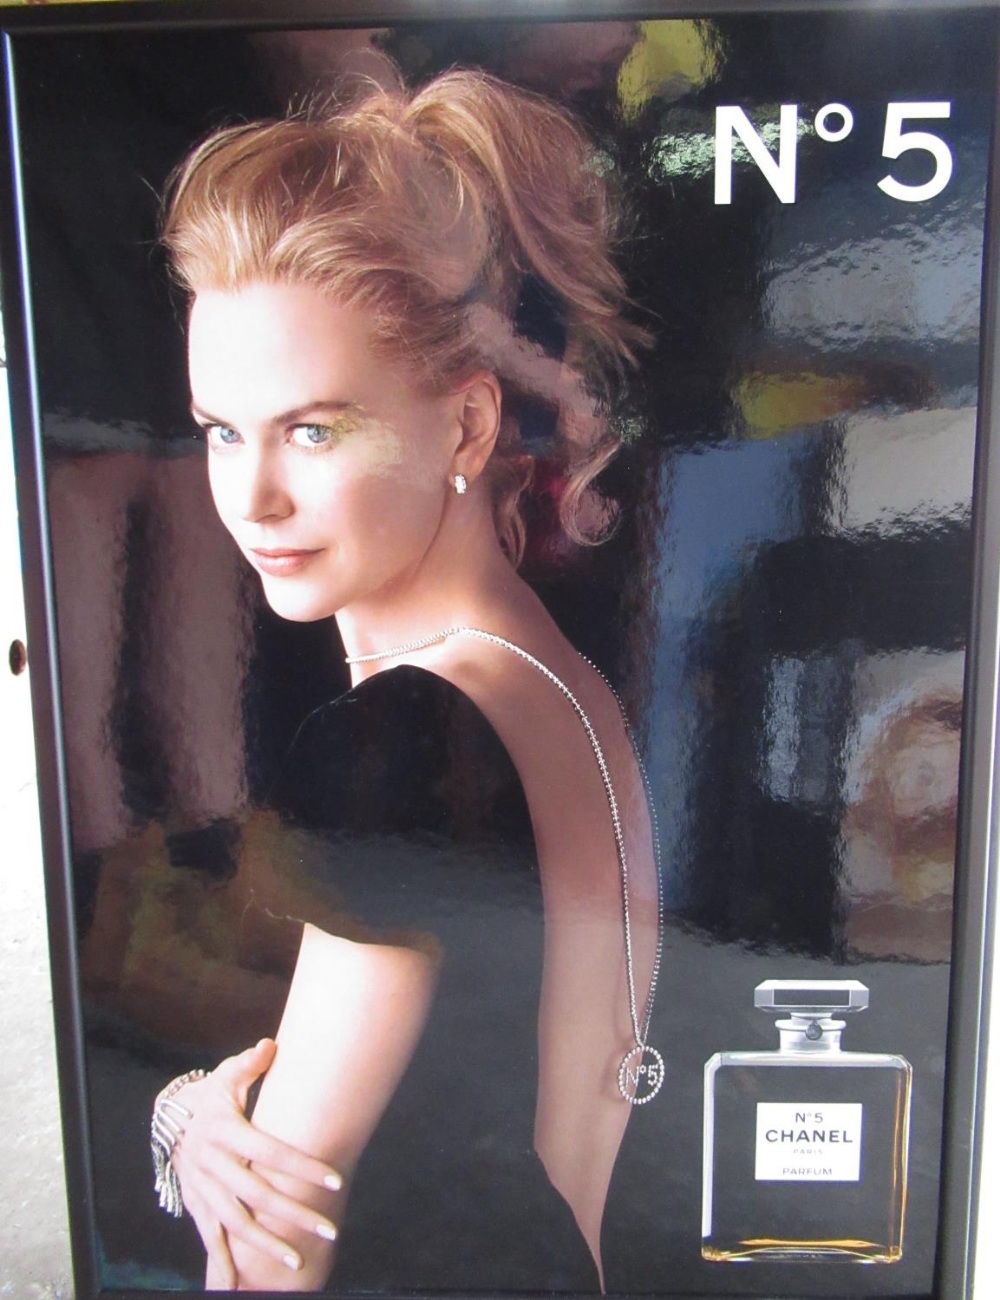 Chanel - two colour advertising posters for No.5 Parfum with Nicole Kidman and Coco Mademoiselle - Image 2 of 2